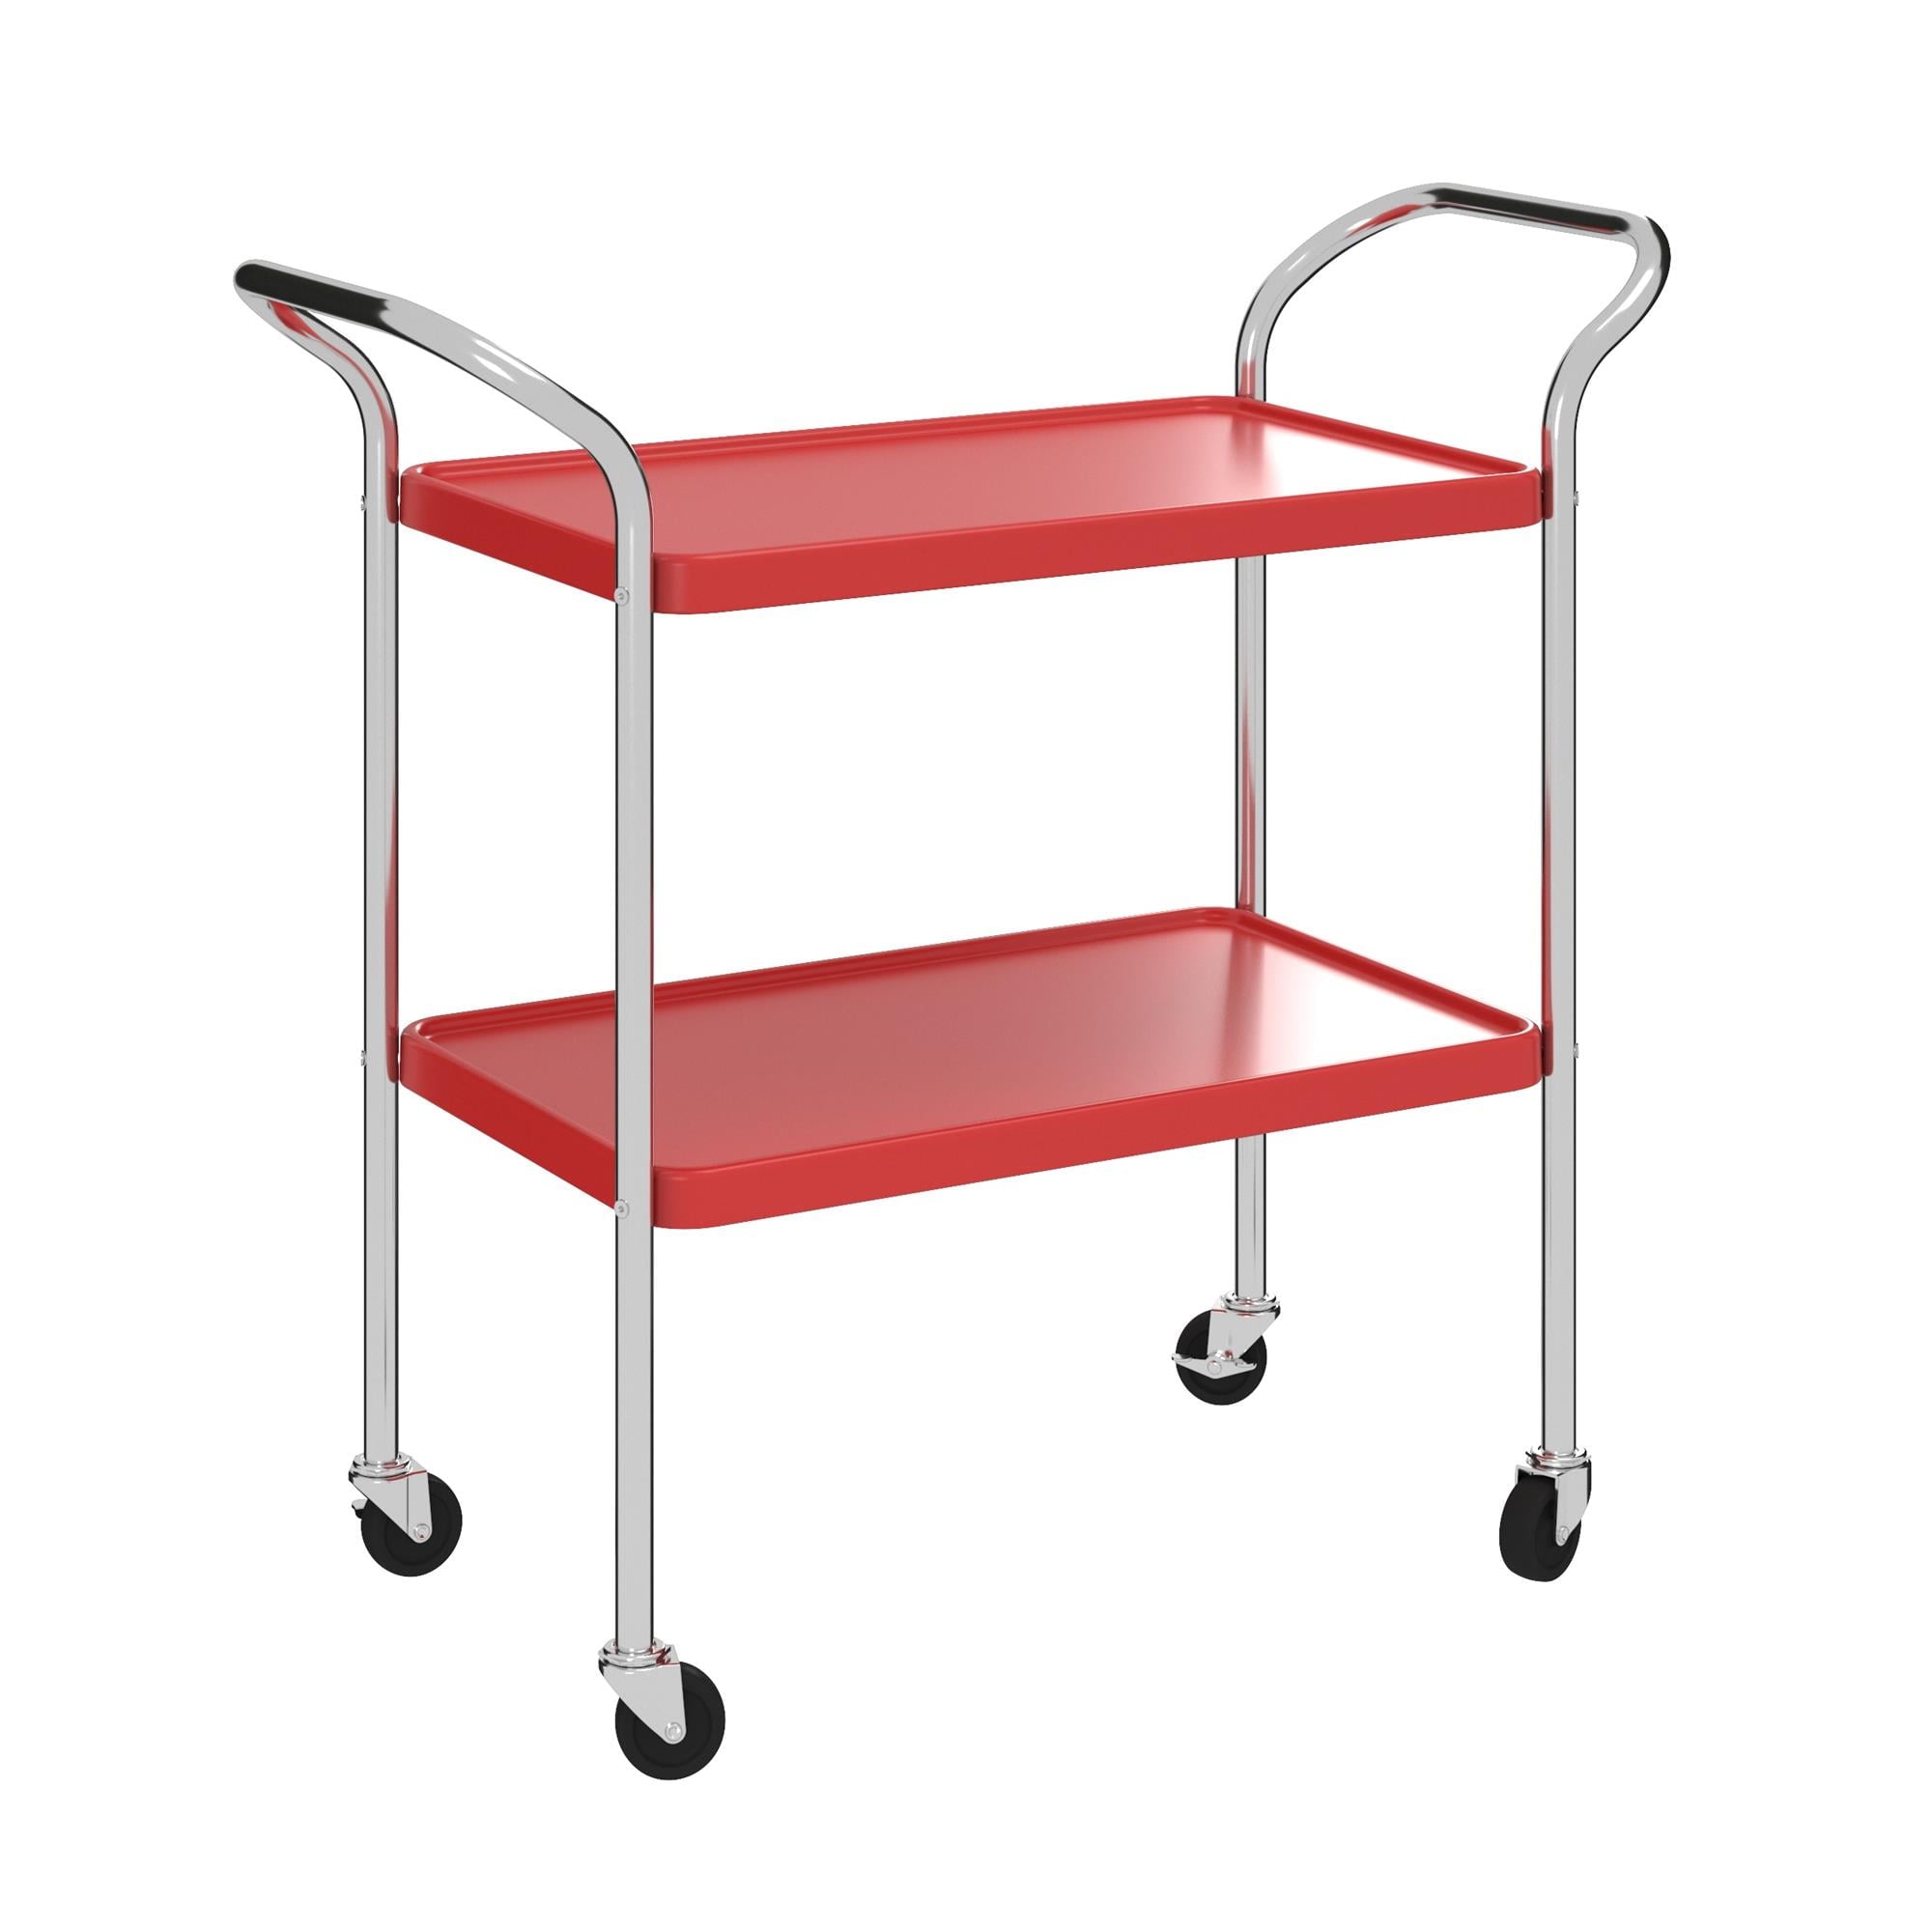 COSCO Stylaire 2 Tier Serving Cart, Red & Silver